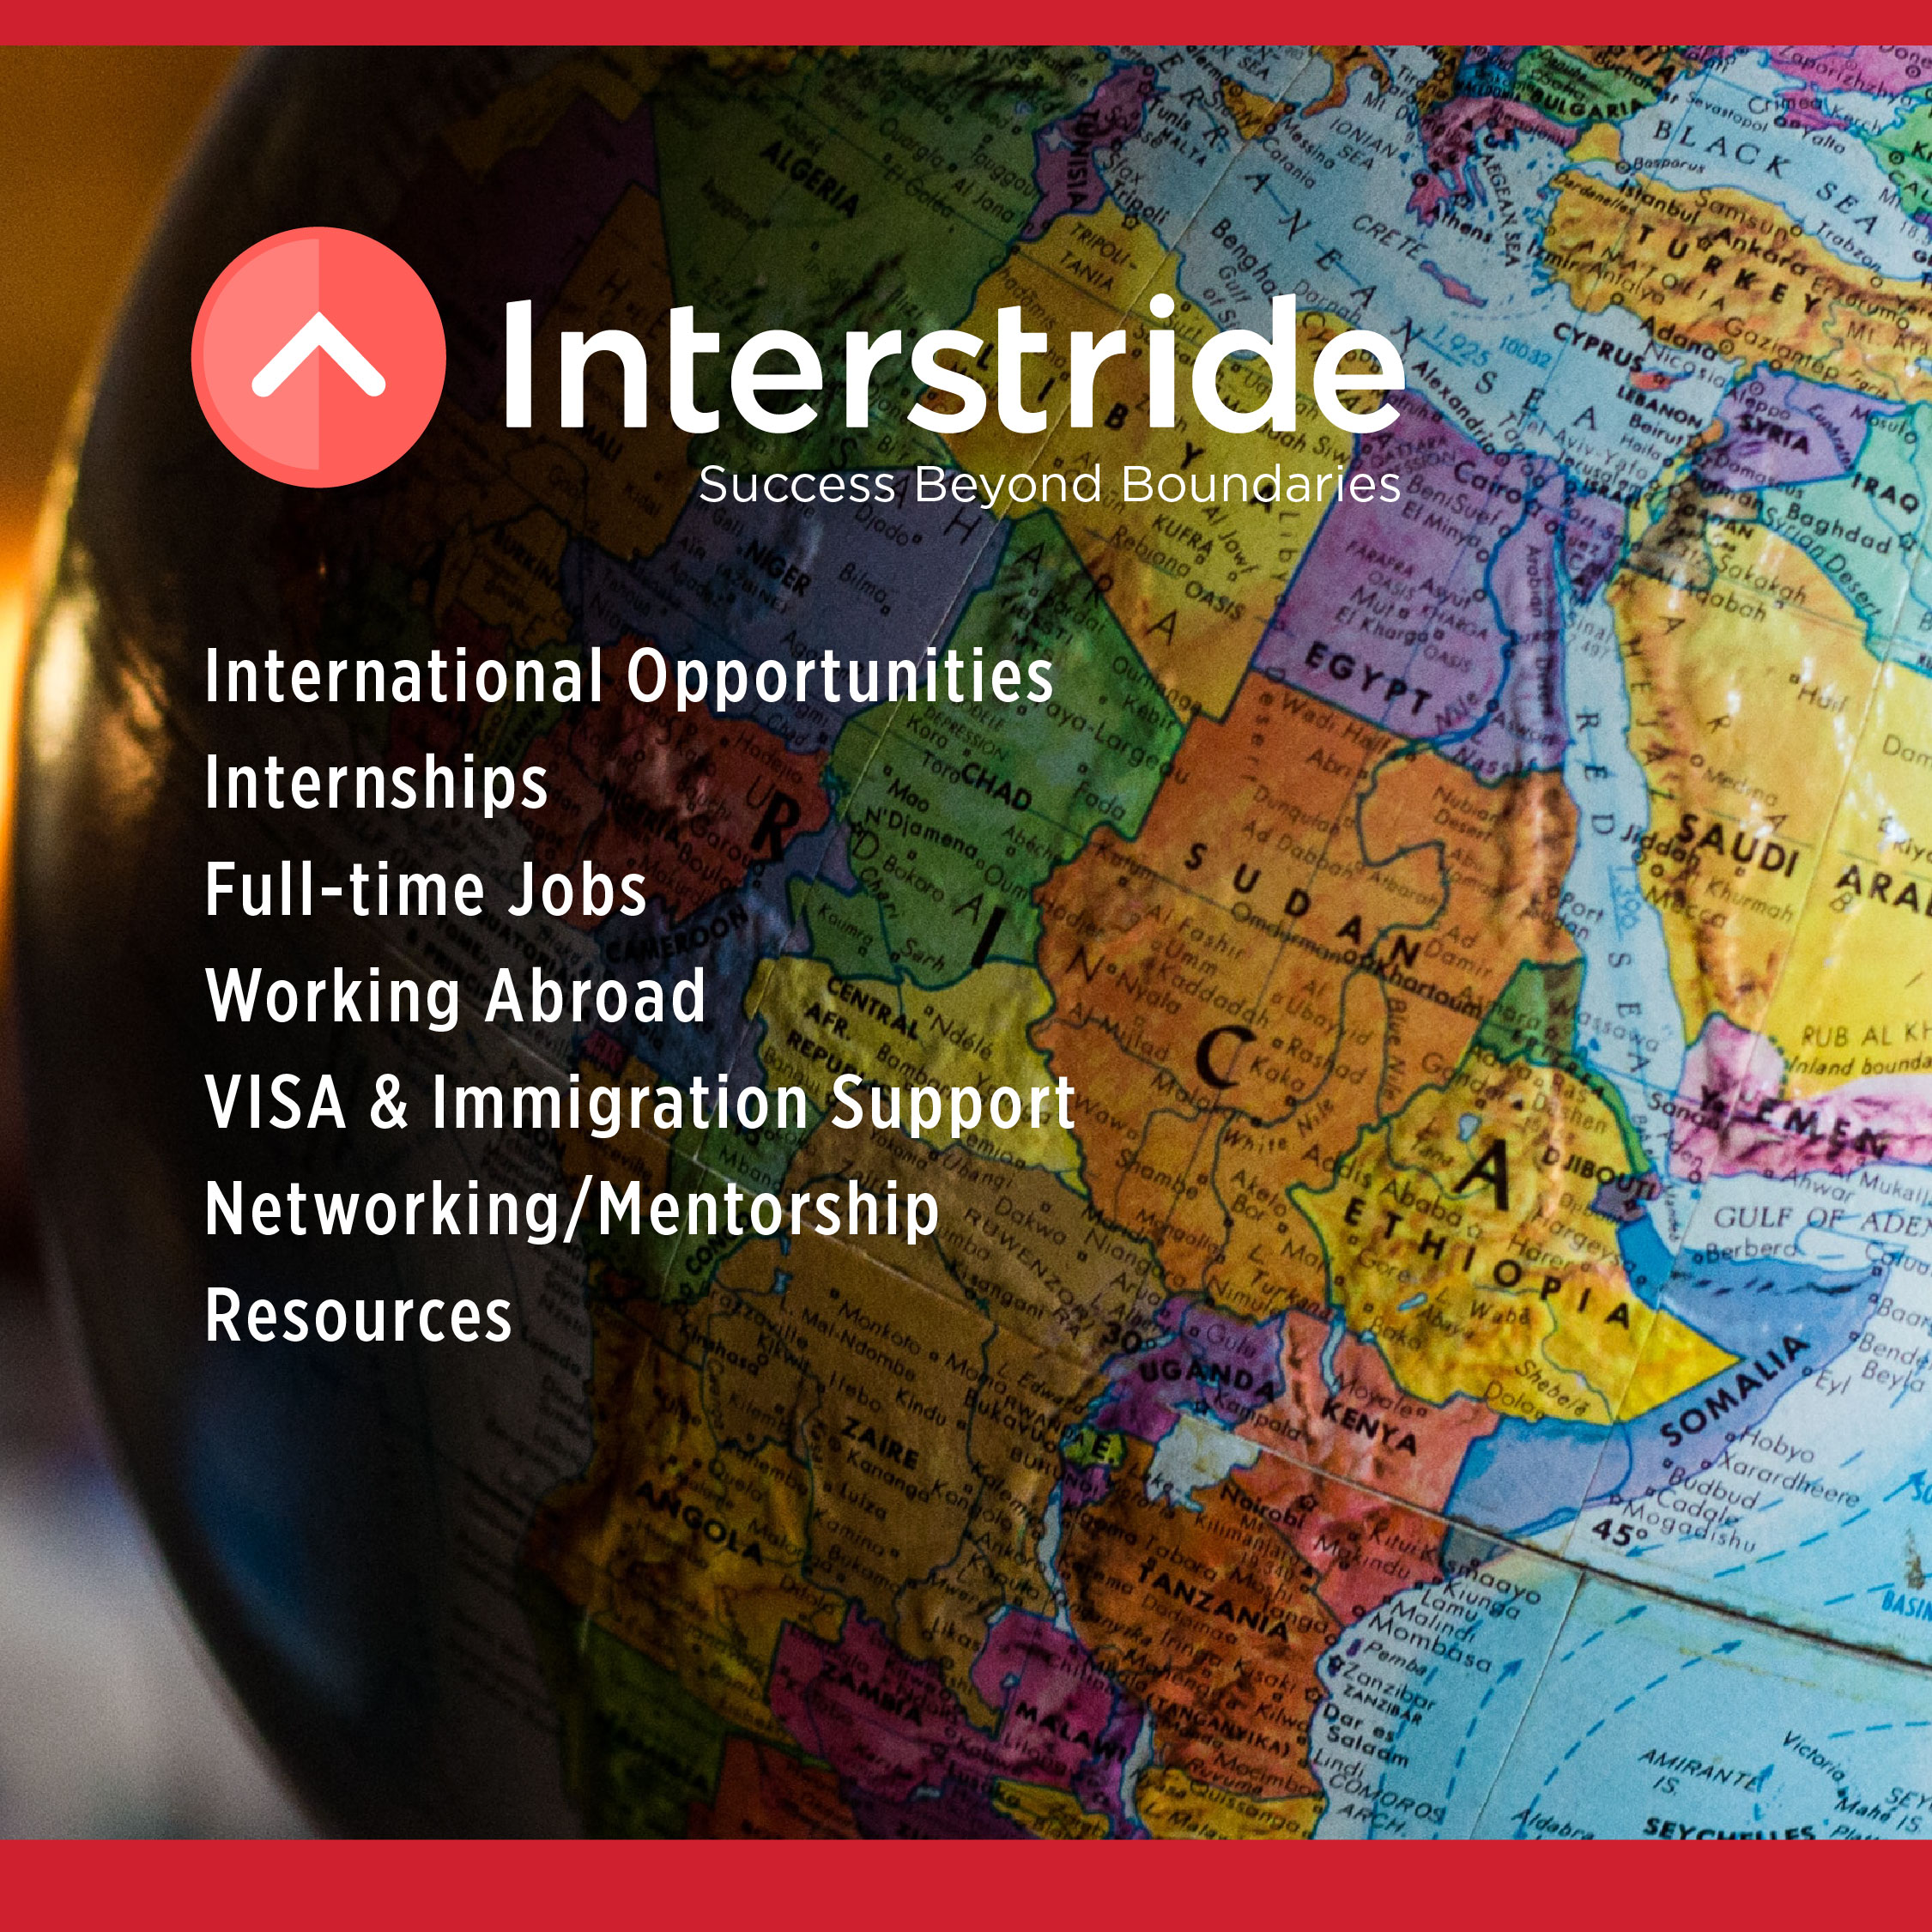 Photo of a globe "Interstride is a global job resource for domestic and international career opportunities"